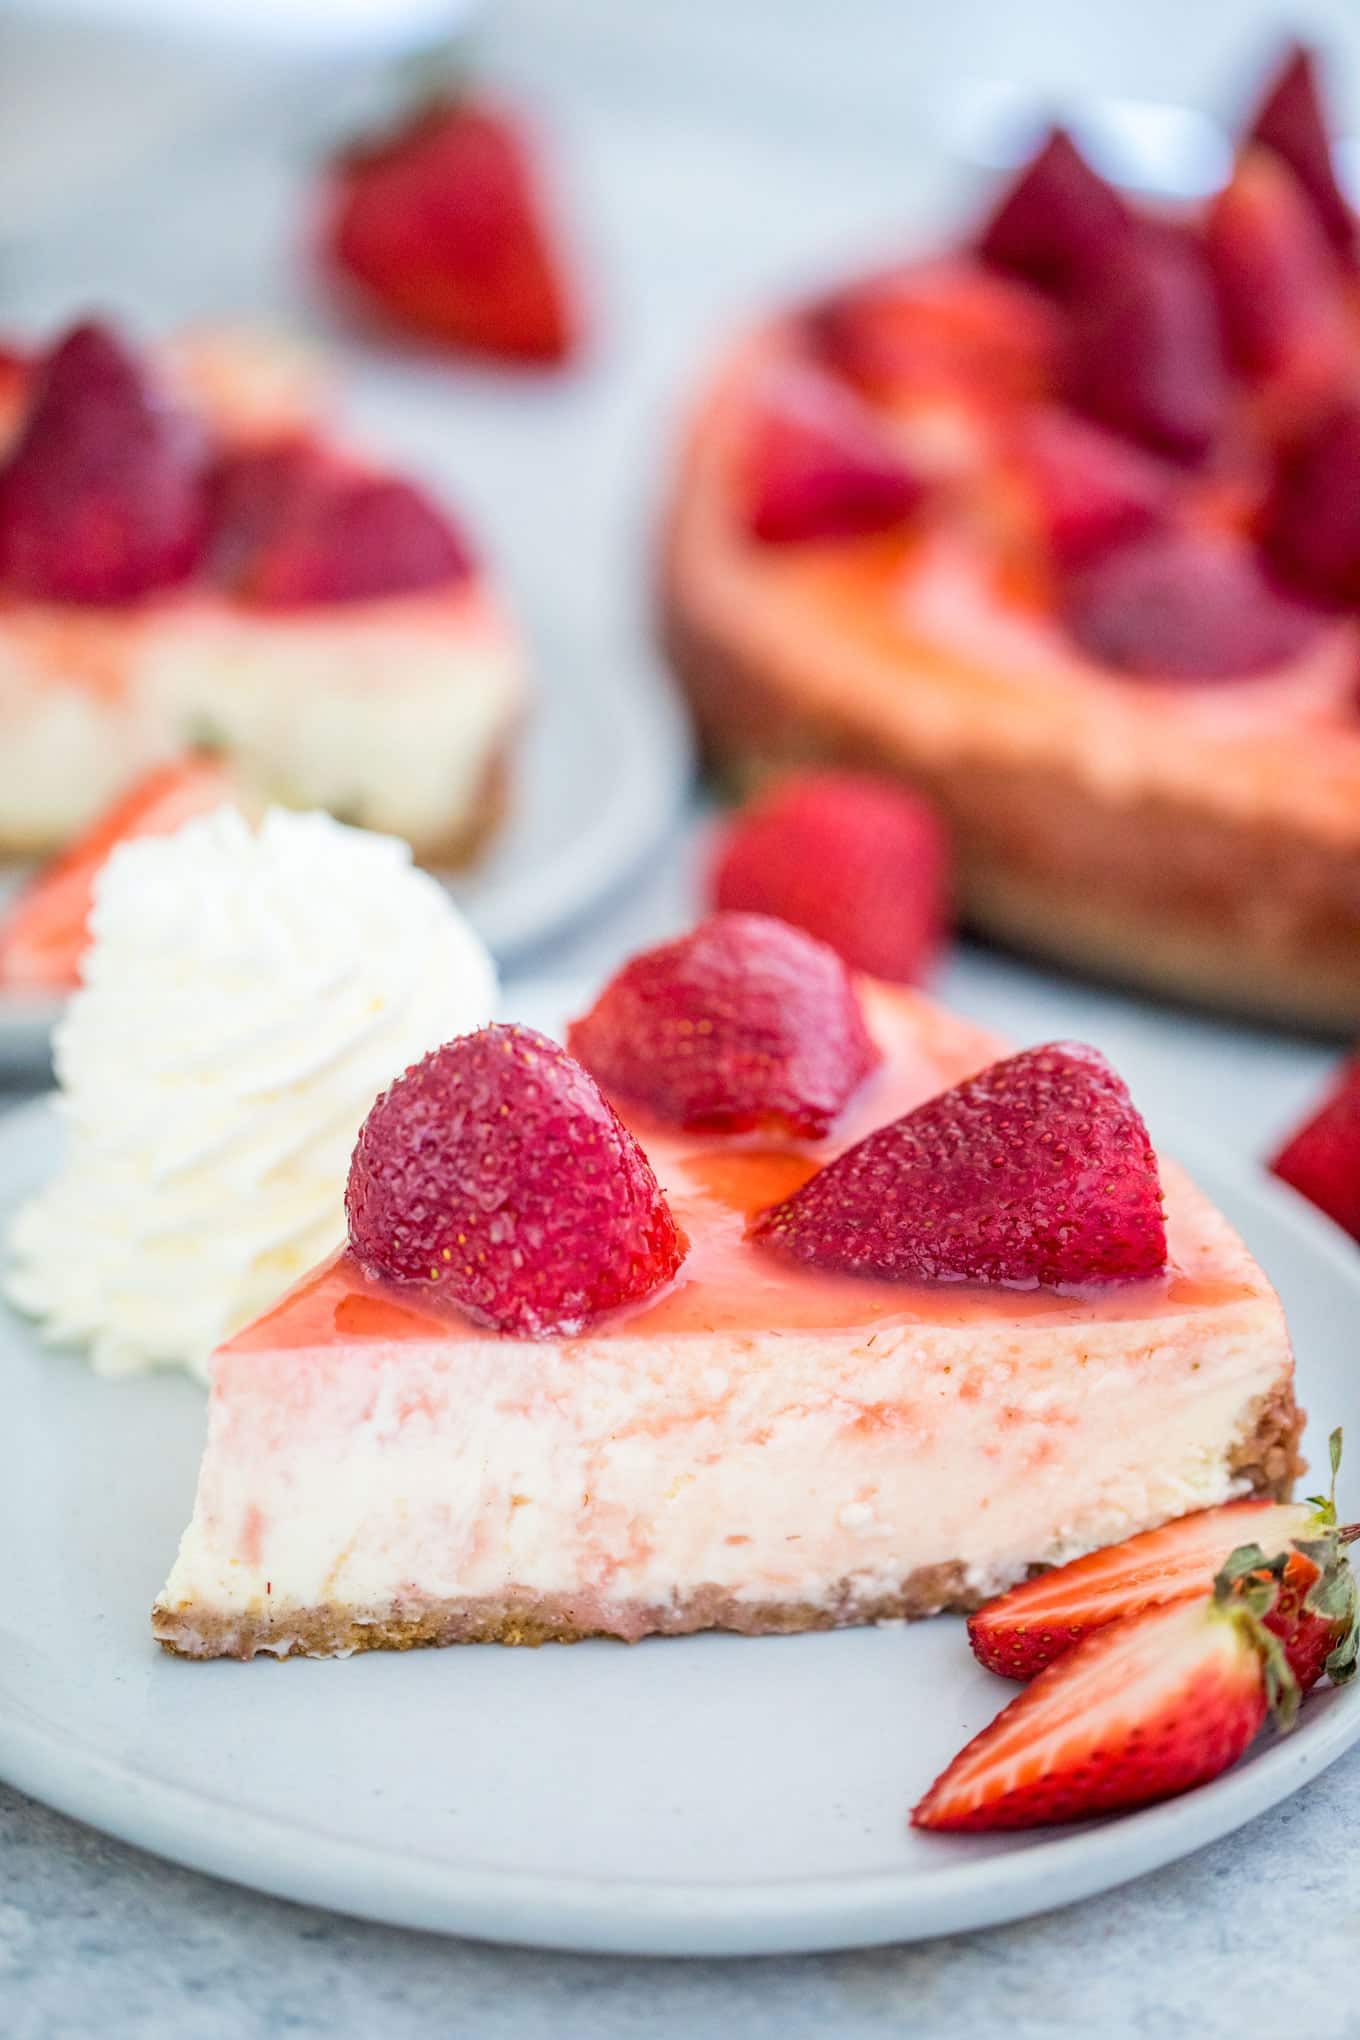 Delicious Strawberry Cheese Cake – Easy Recipes To Make at Home